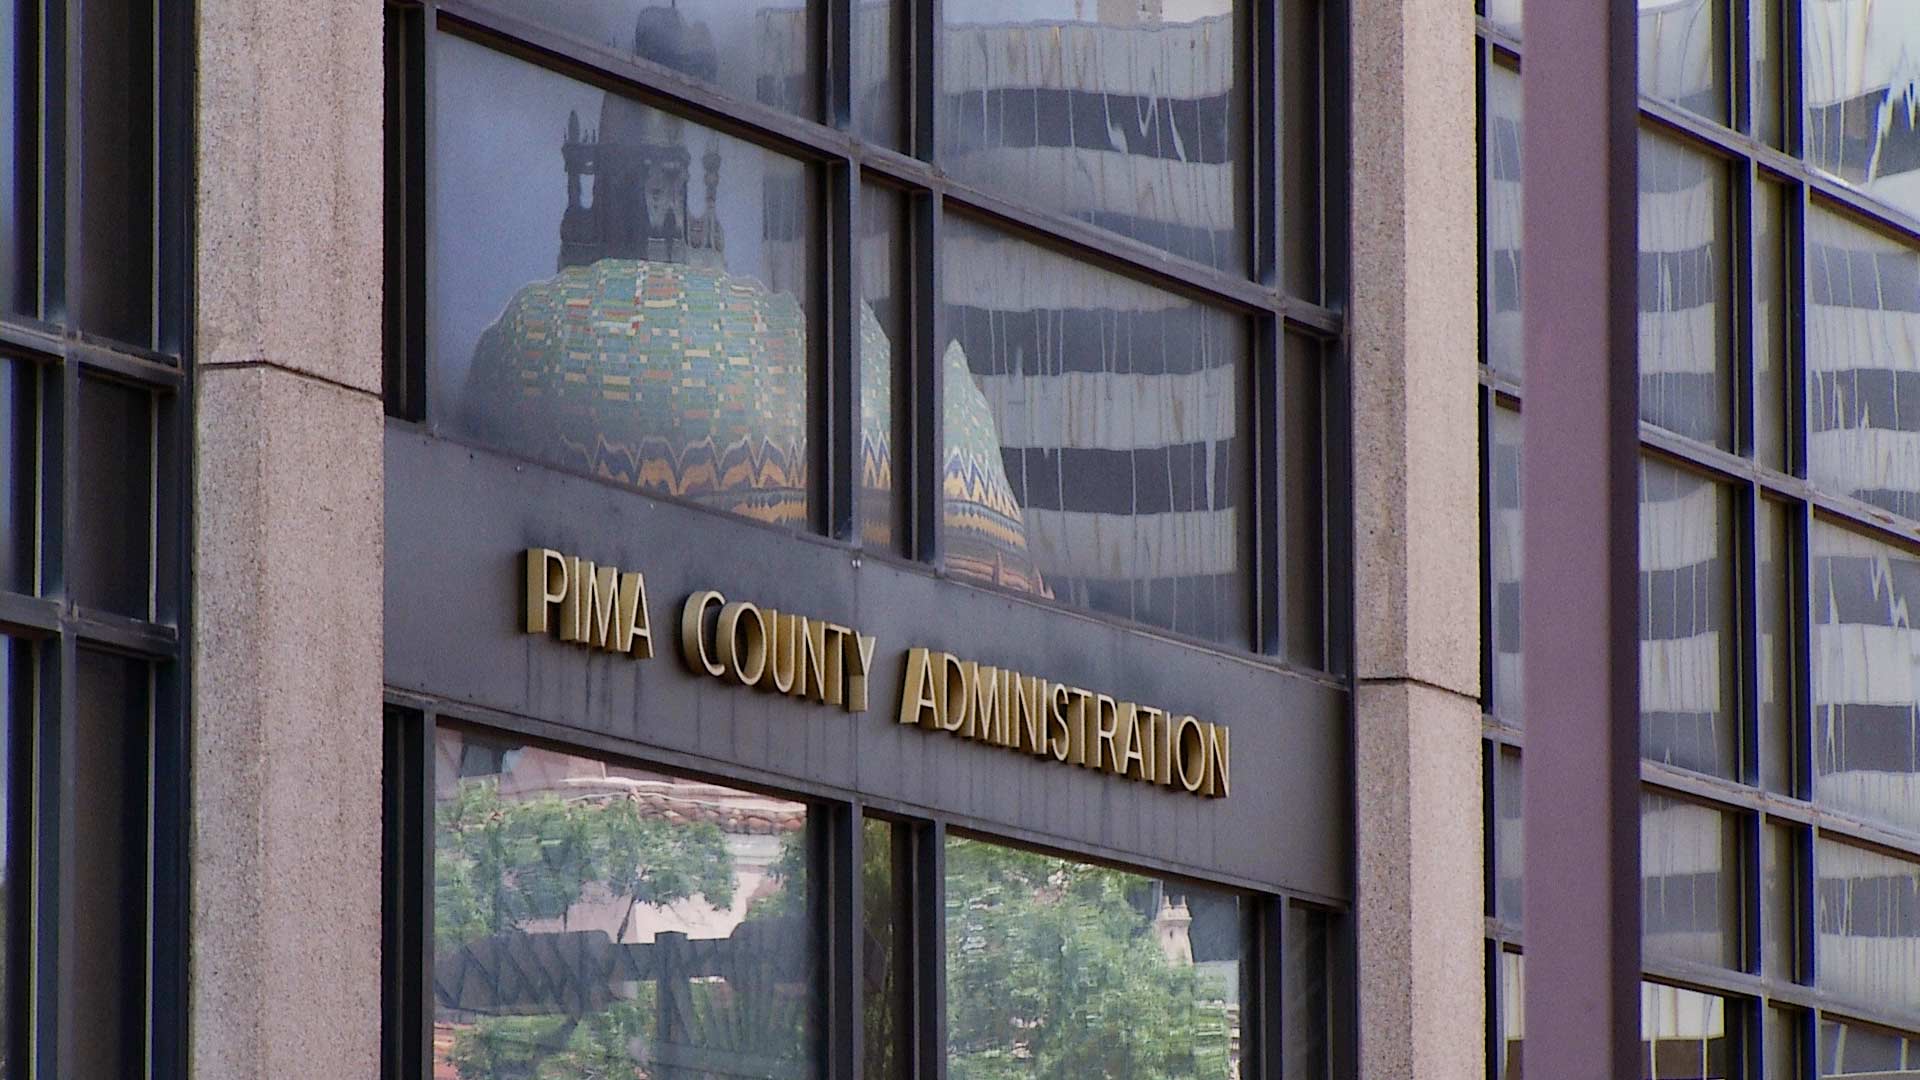 The Pima County Board of Supervisors meets at the County Administration Building in downtown Tucson.